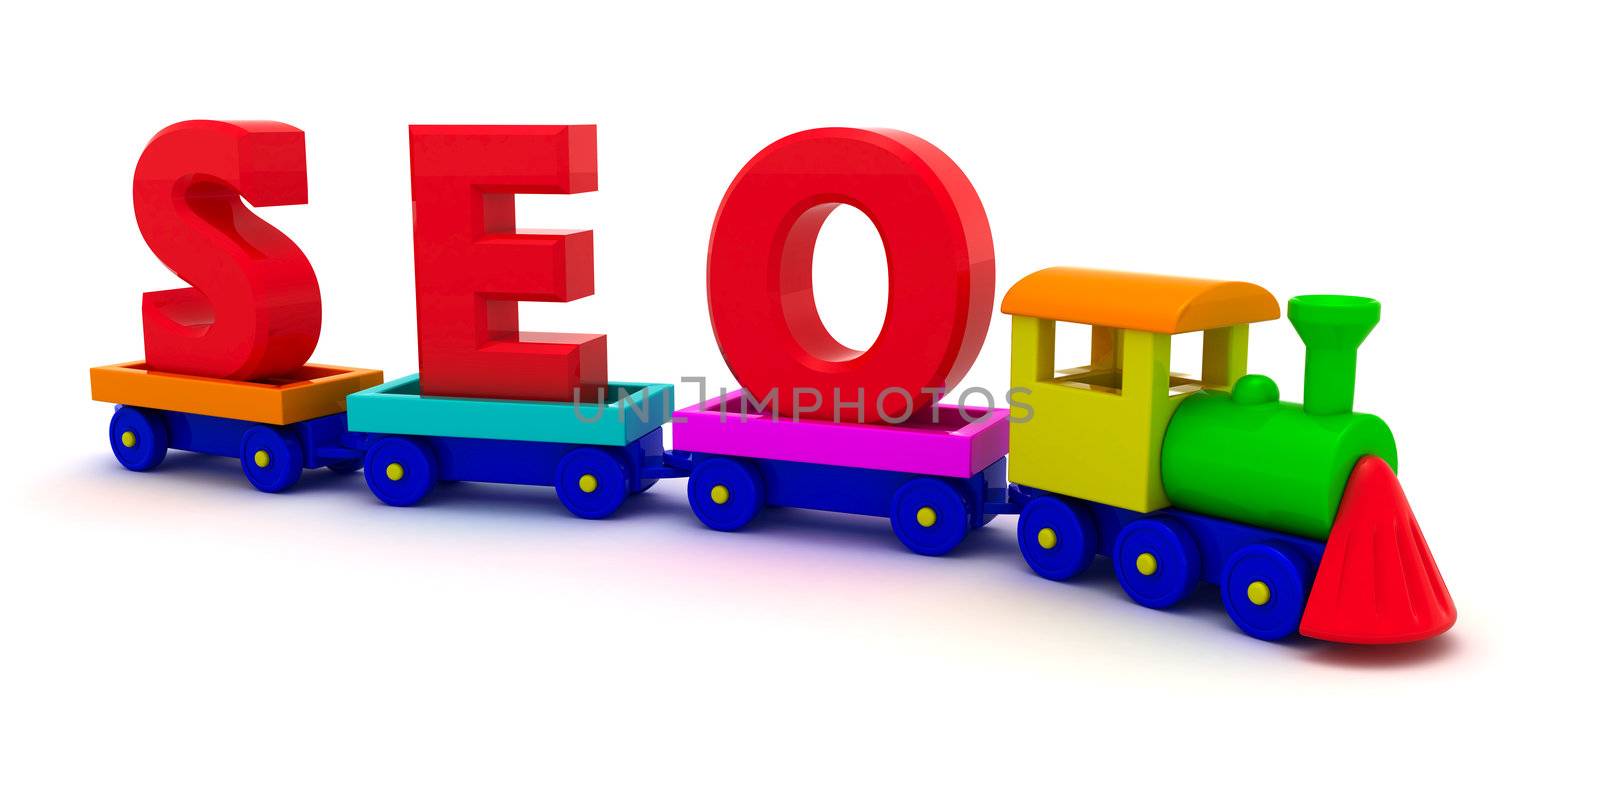 The word "SEO" on the toy train